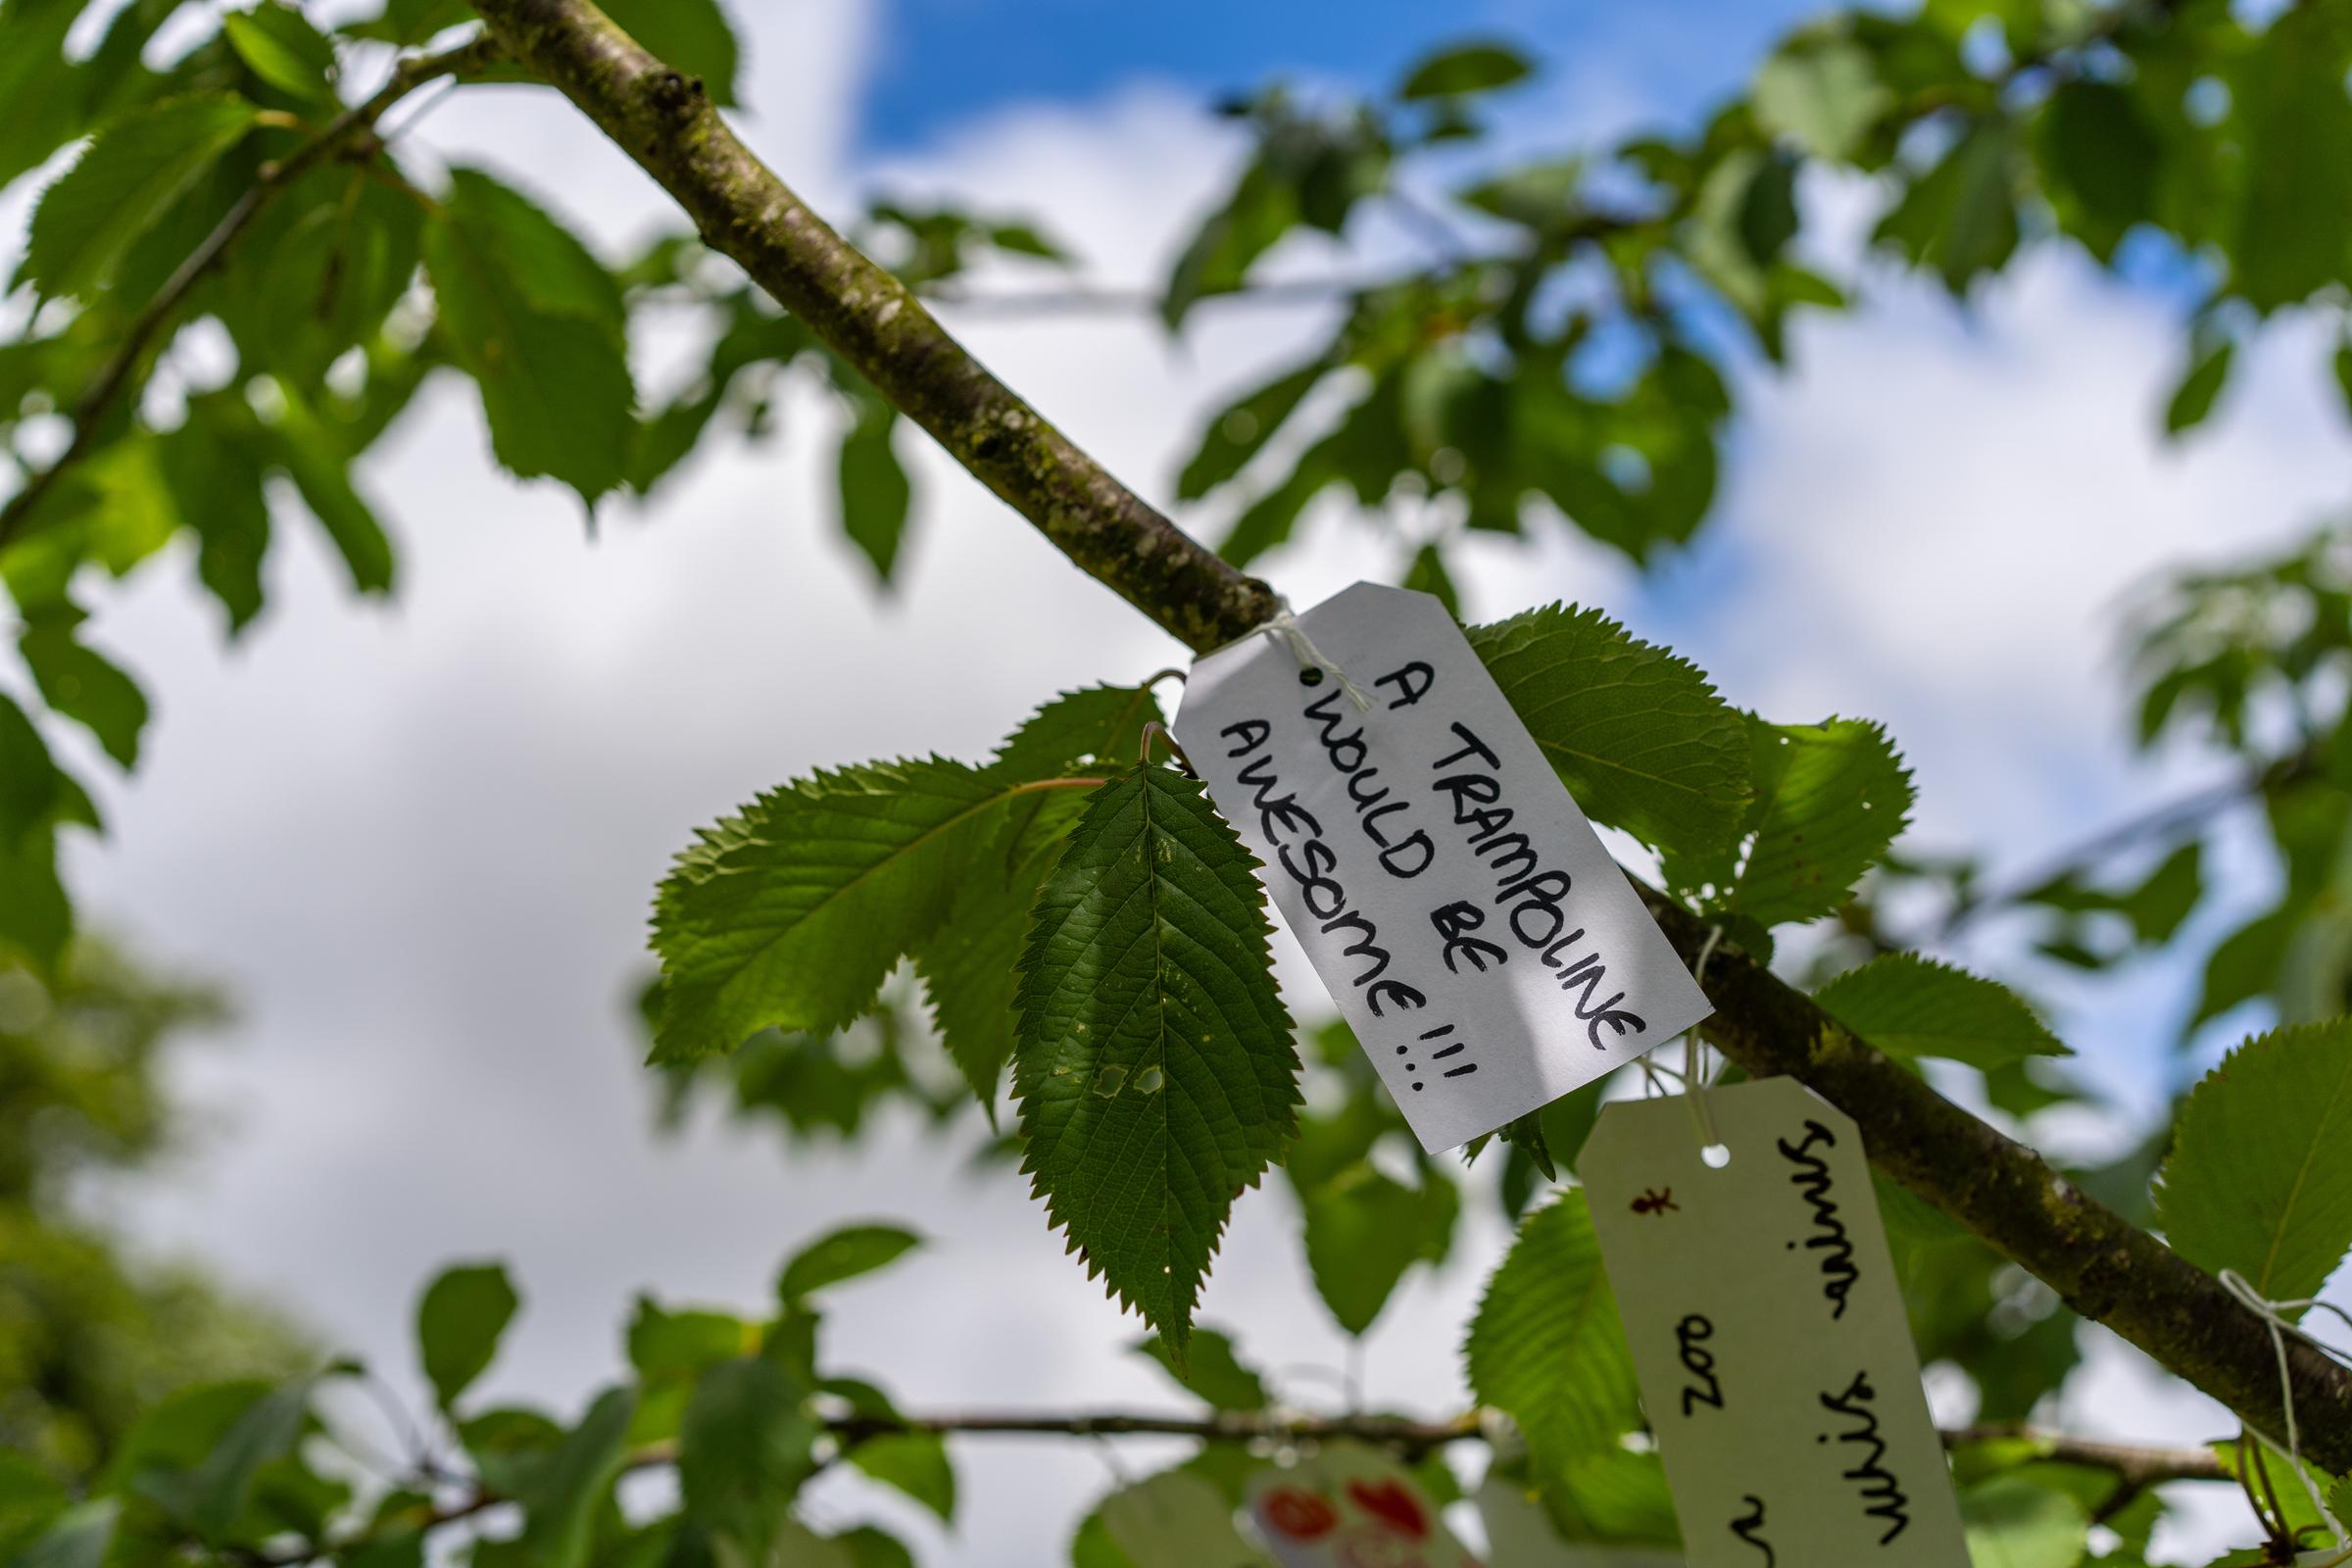 People's wishes for Homestead Park recorded on labels tied to a tree